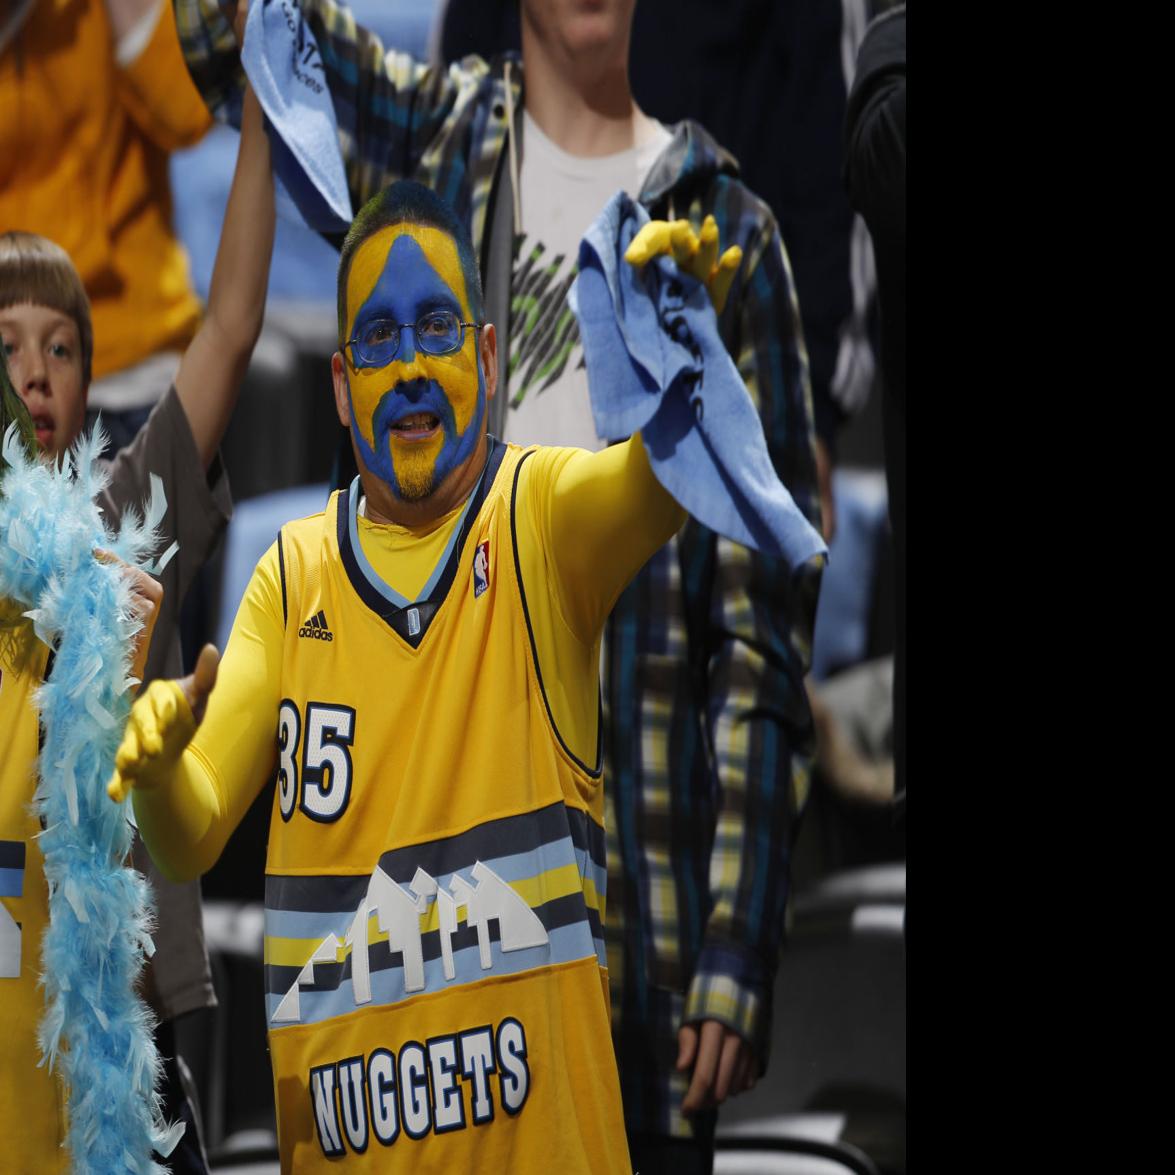 CHAMPIANS or CHAMPIONS? Denver Nuggets NBA Championship hats appear to have  misspelling - CBS Colorado